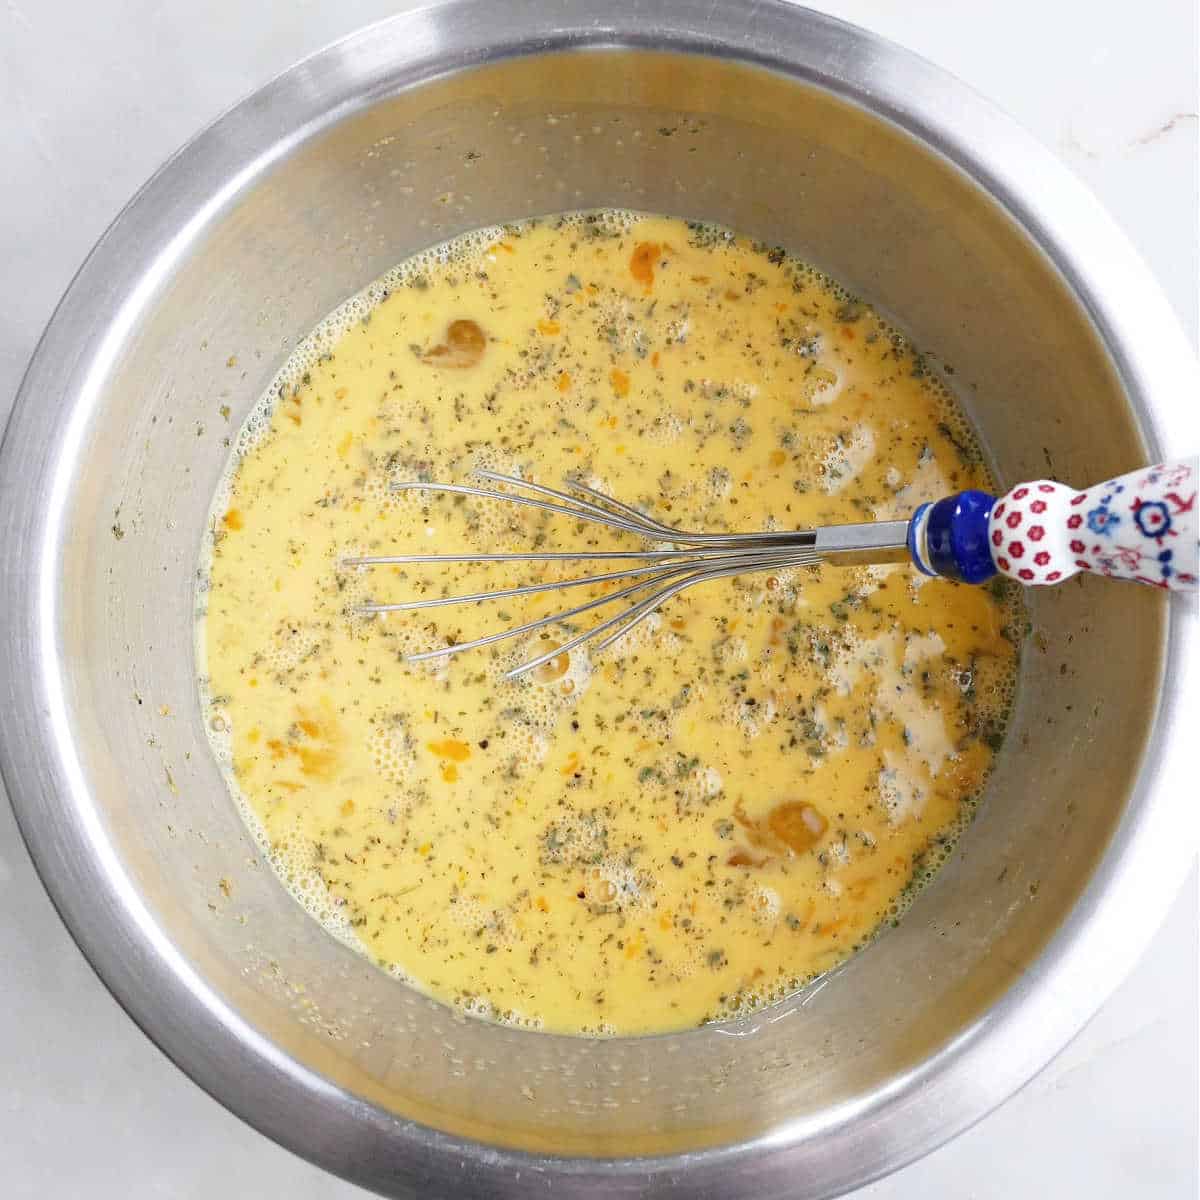 eggs, cheese, milk, and spices being whisked together in a mixing bowl